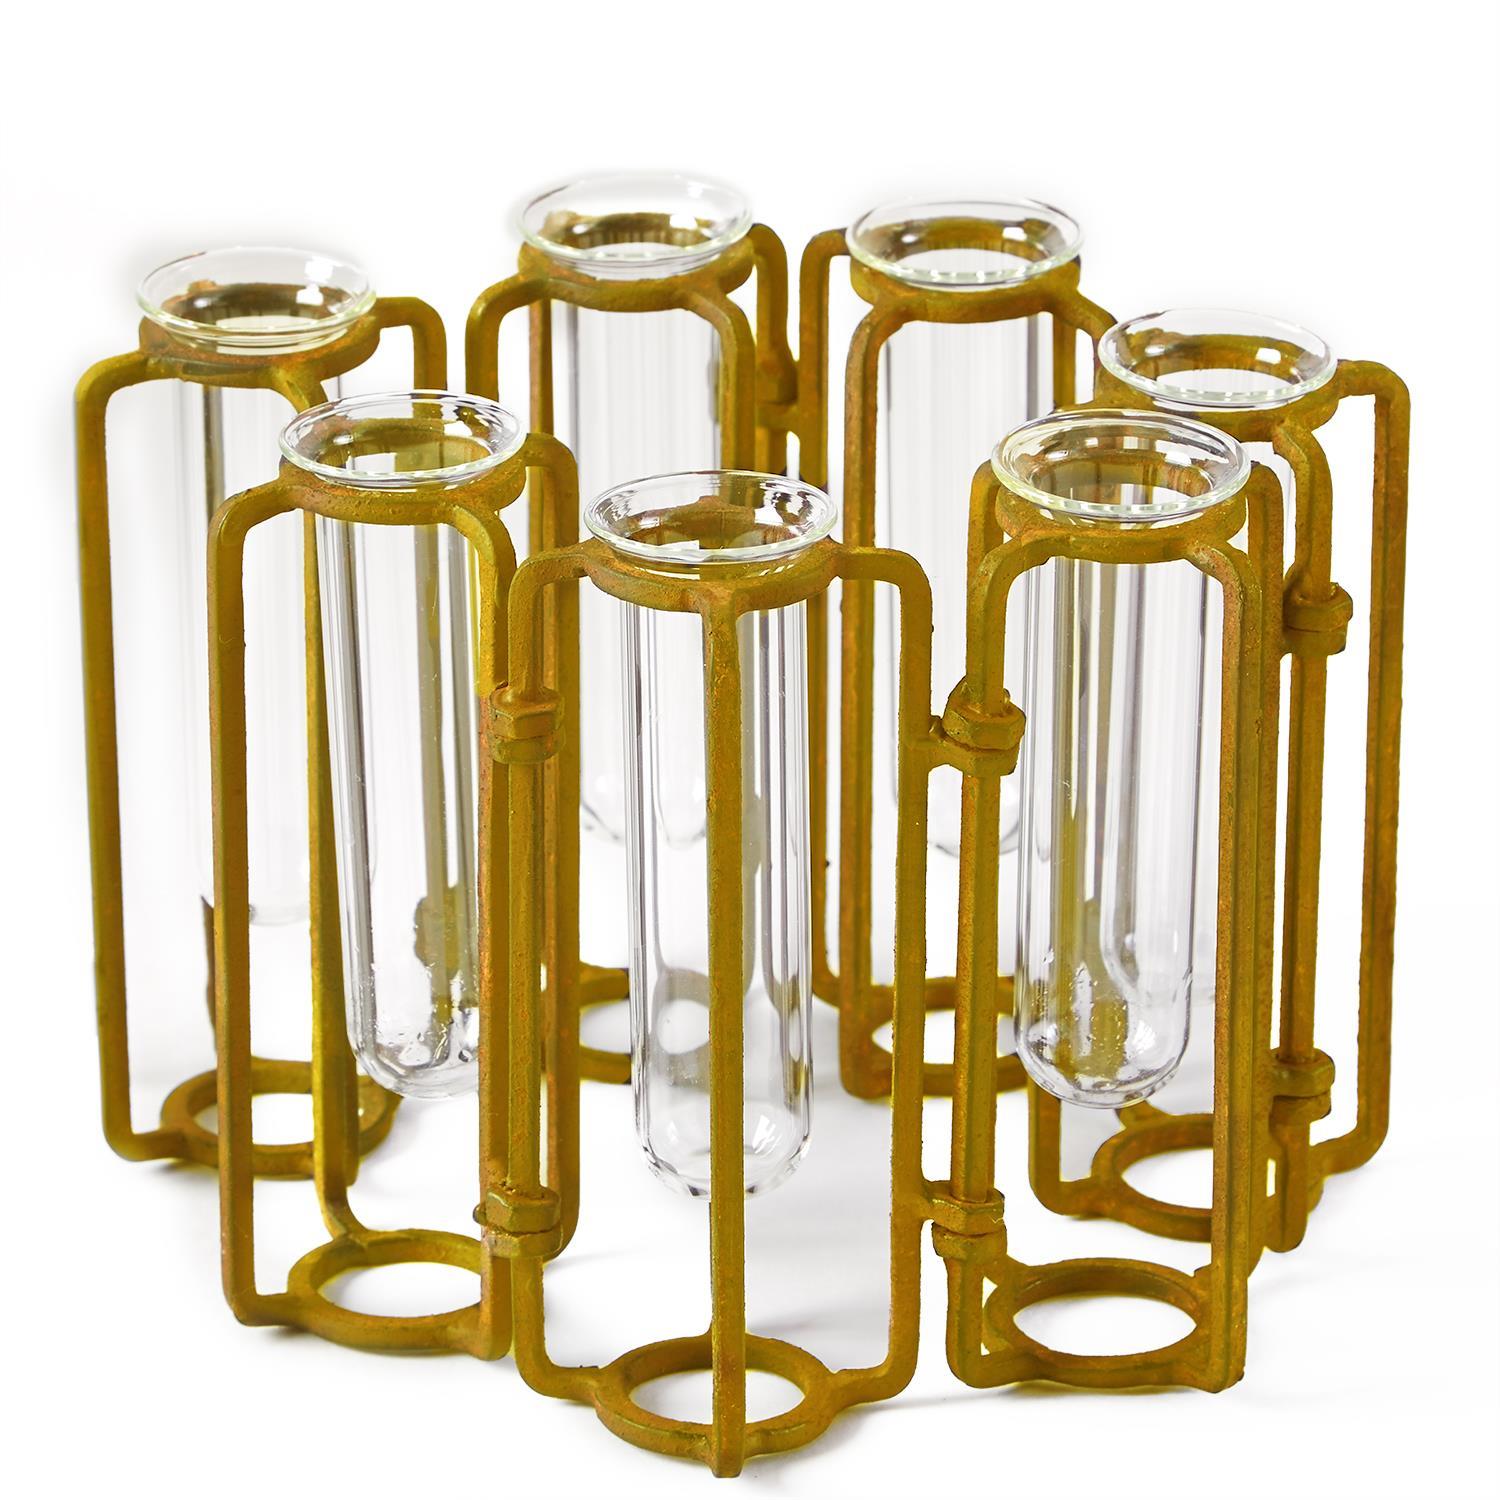 Two's Company Tozai Lavoisier Set of 10 Hinged Flower Vases with Antiqued  Gold Finish | James Anthony Collection